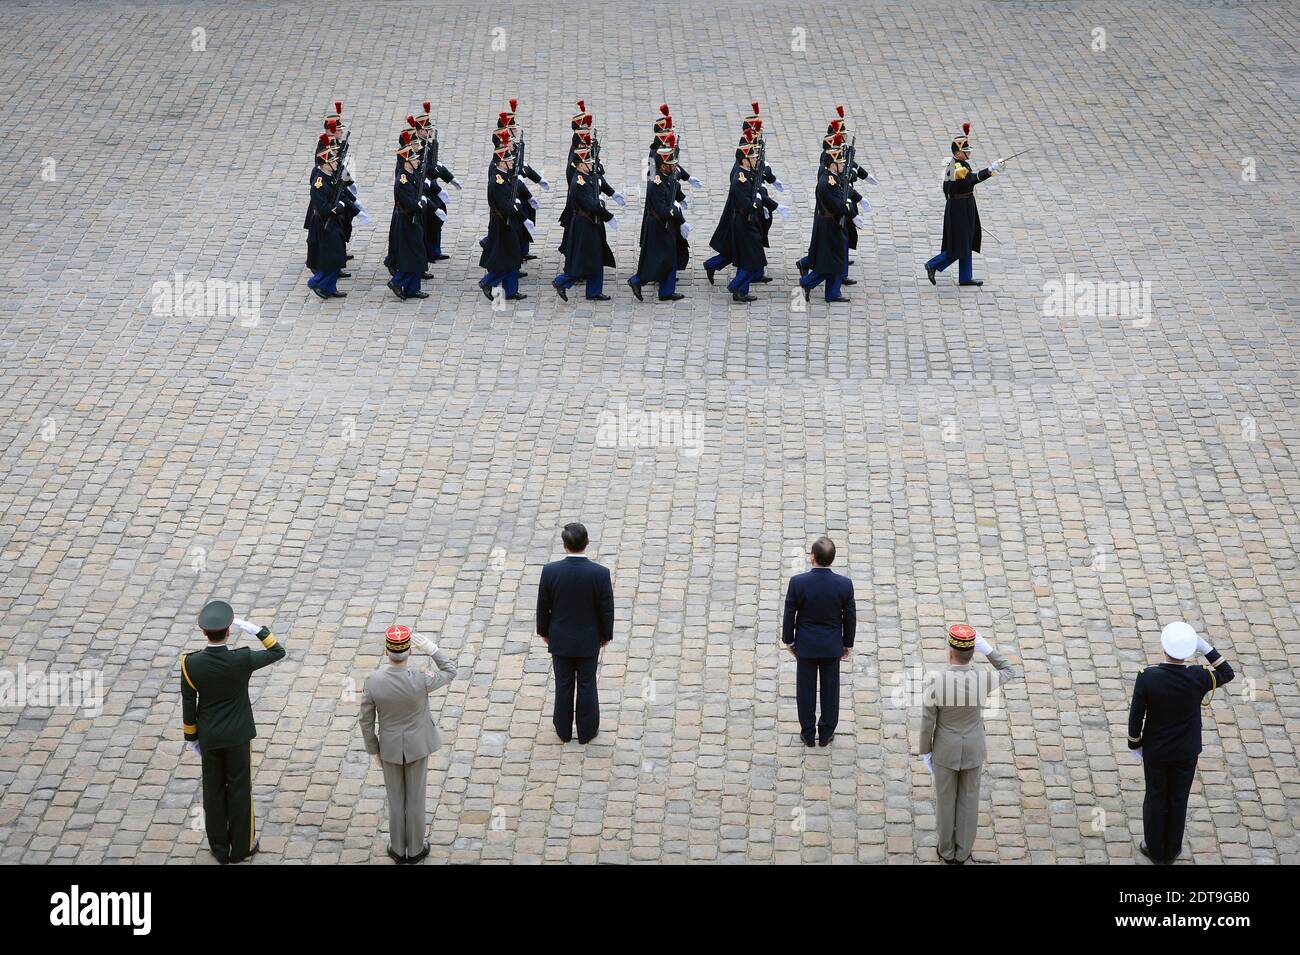 French President Francois Hollande and the President of the People's Republic of China Xi Jinping review the troops during a ceremony at the Hotel des Invalides in Paris, France on March 26, 2014. The Chinese President is on a three-day state visit to France. Photo by Nicolas Gouhier/ABACAPRESS.COM Stock Photo